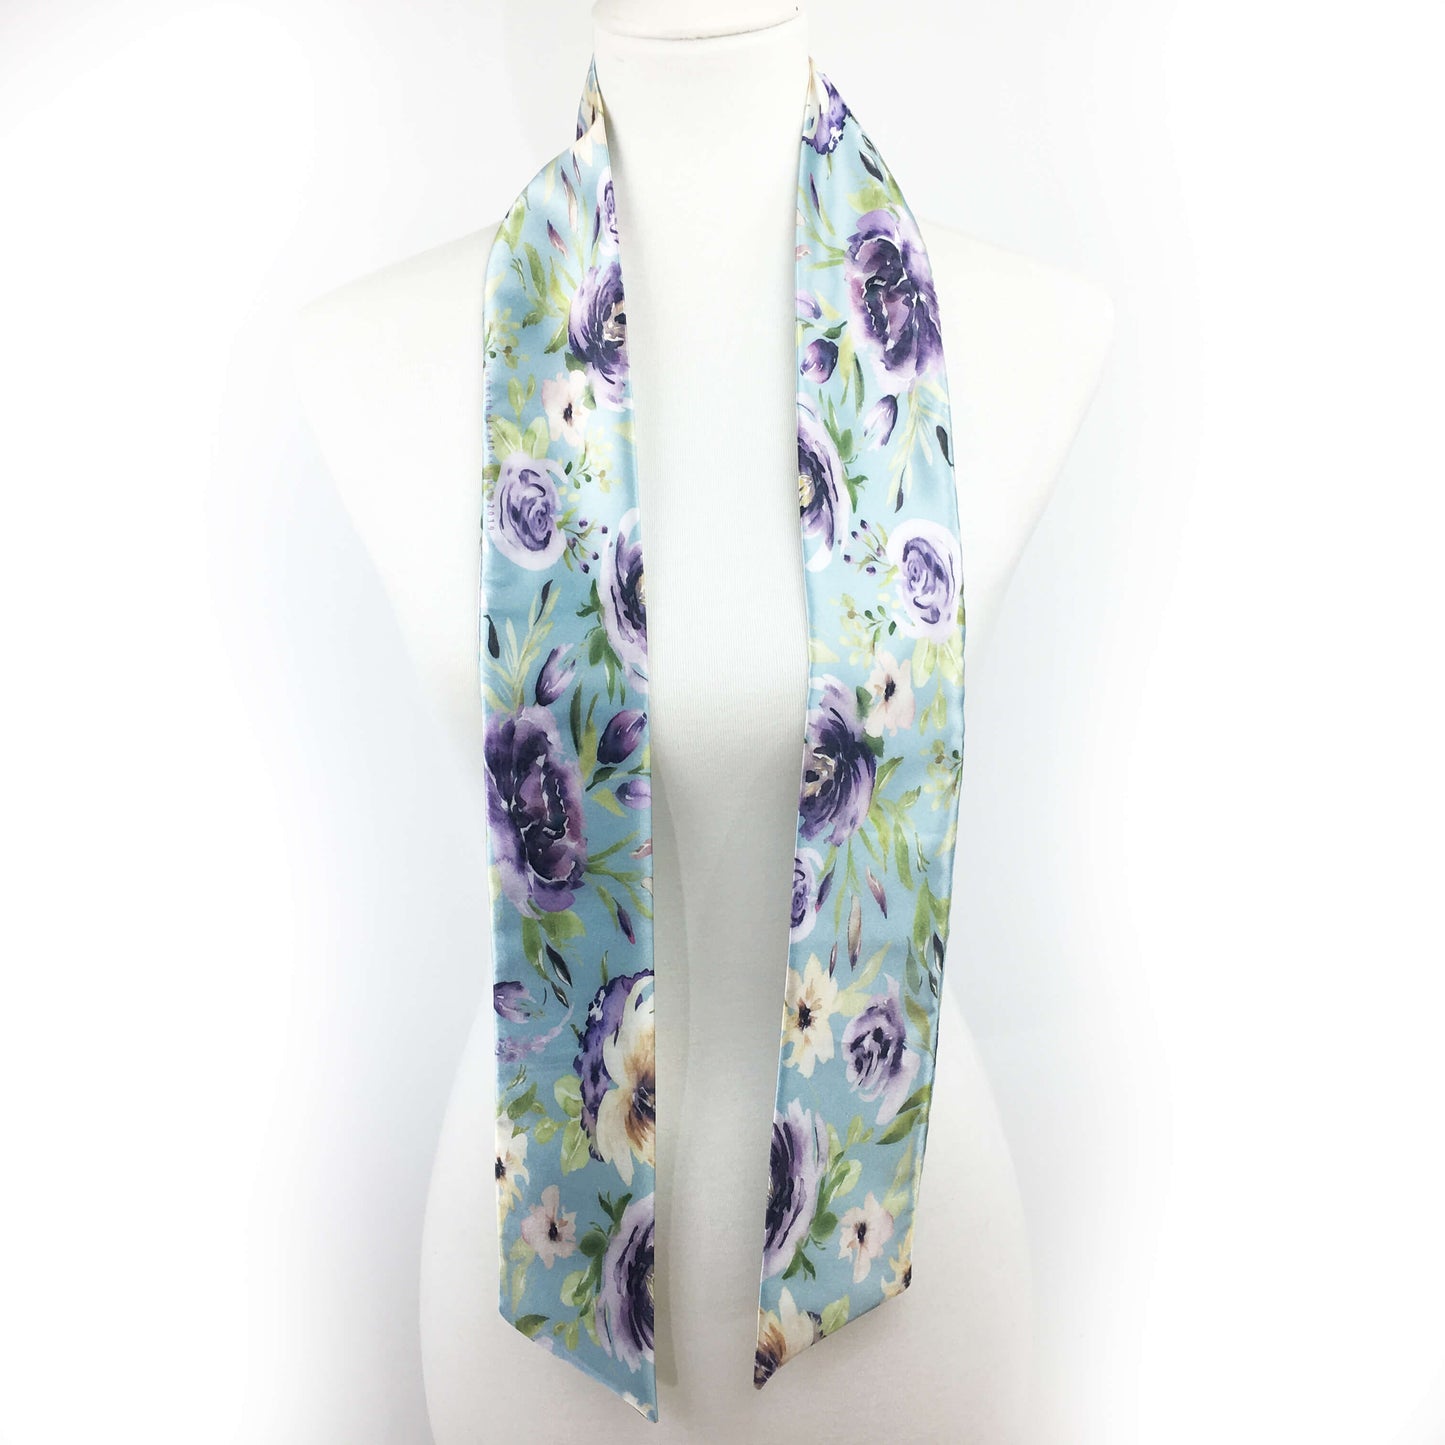 Watercolor Mixed Floral Skinny Scarf on Turquoise - UndertheLeafDesigns.com